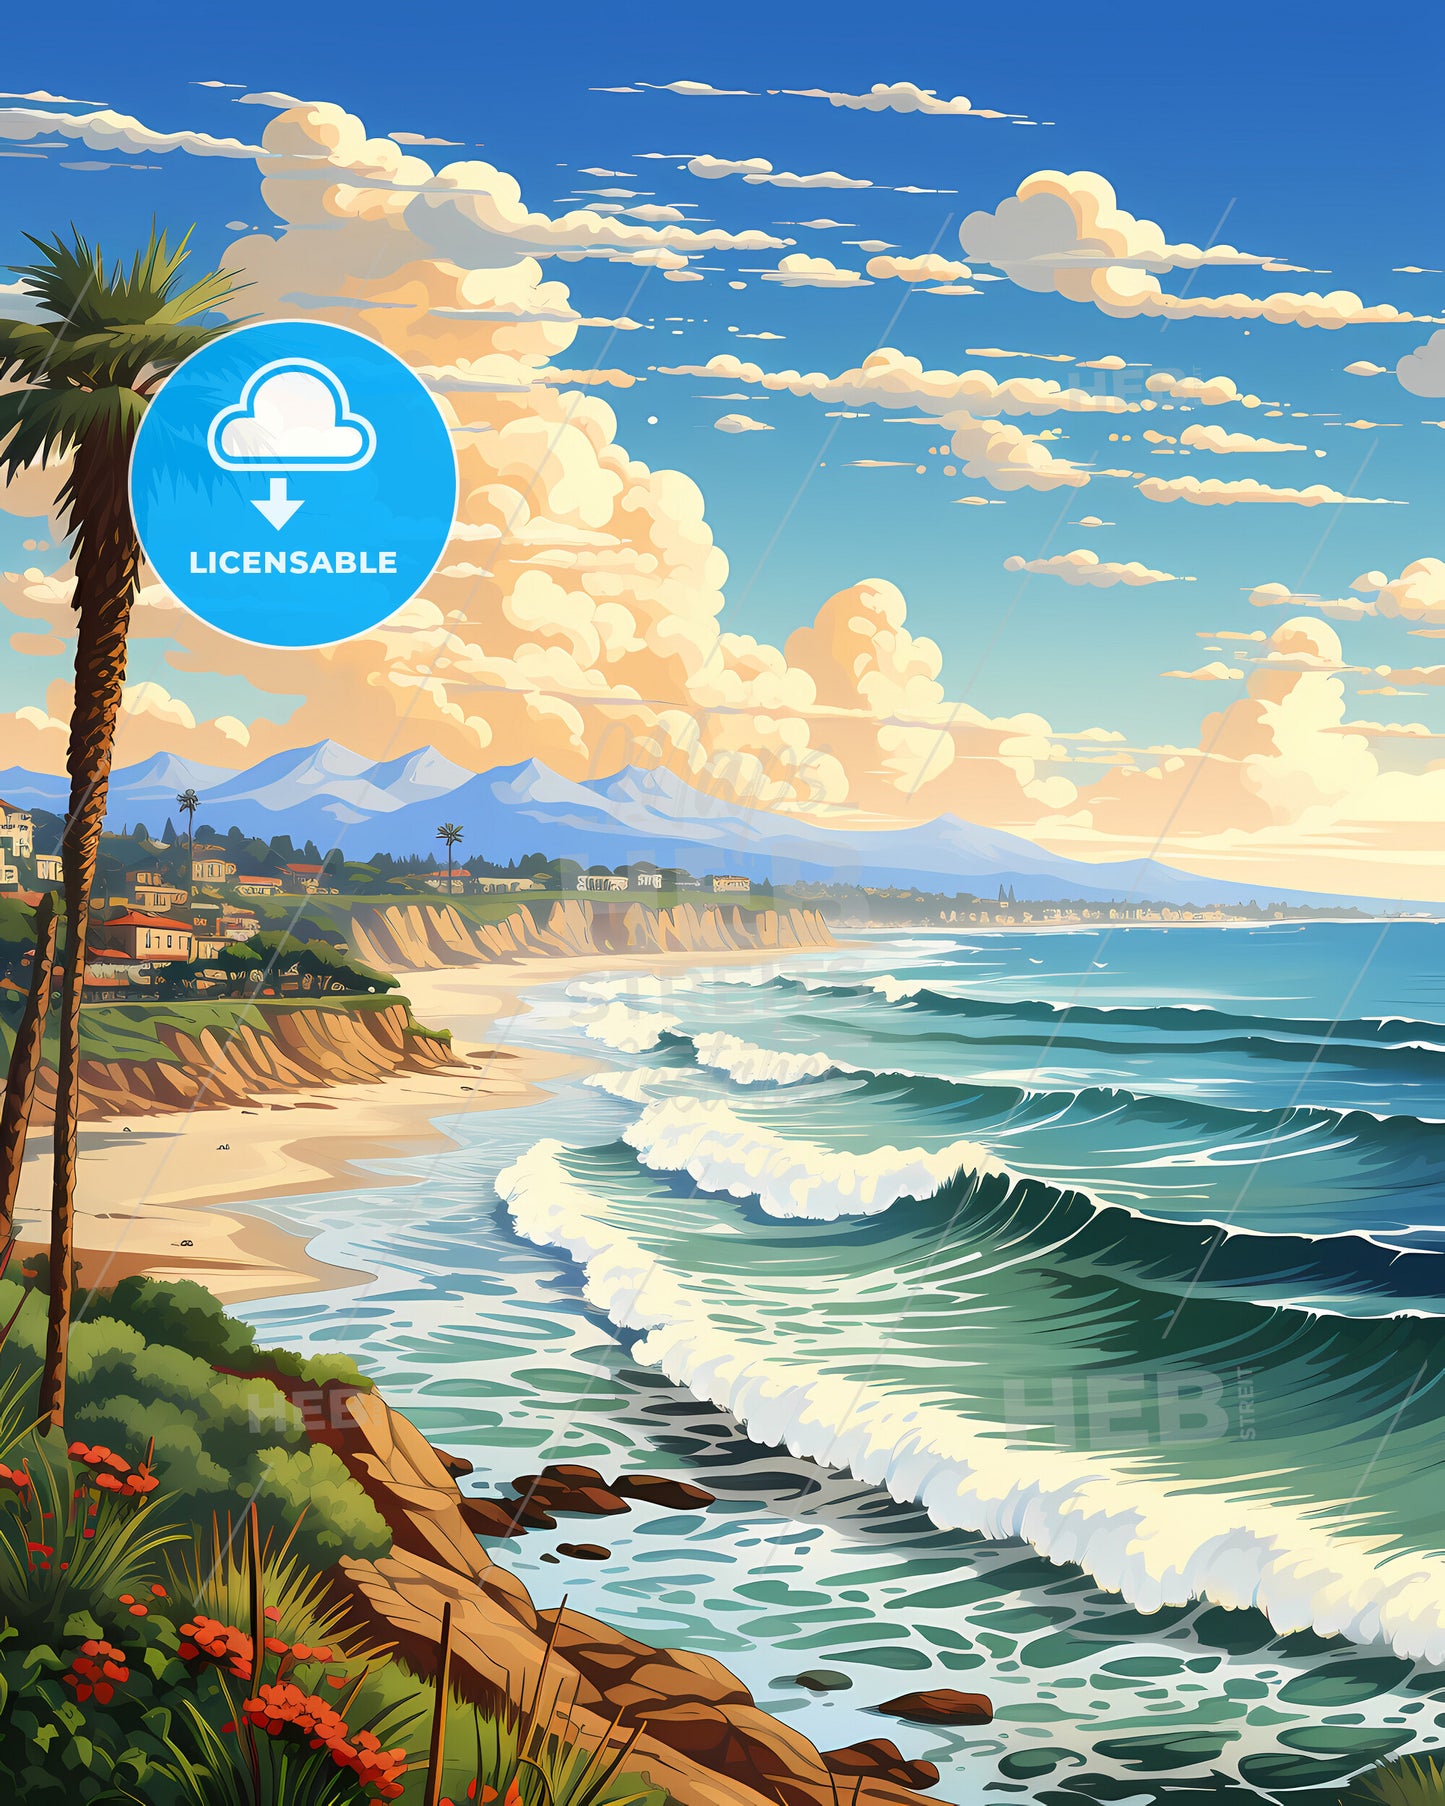 San Clemente, California, a beach with waves and palm trees